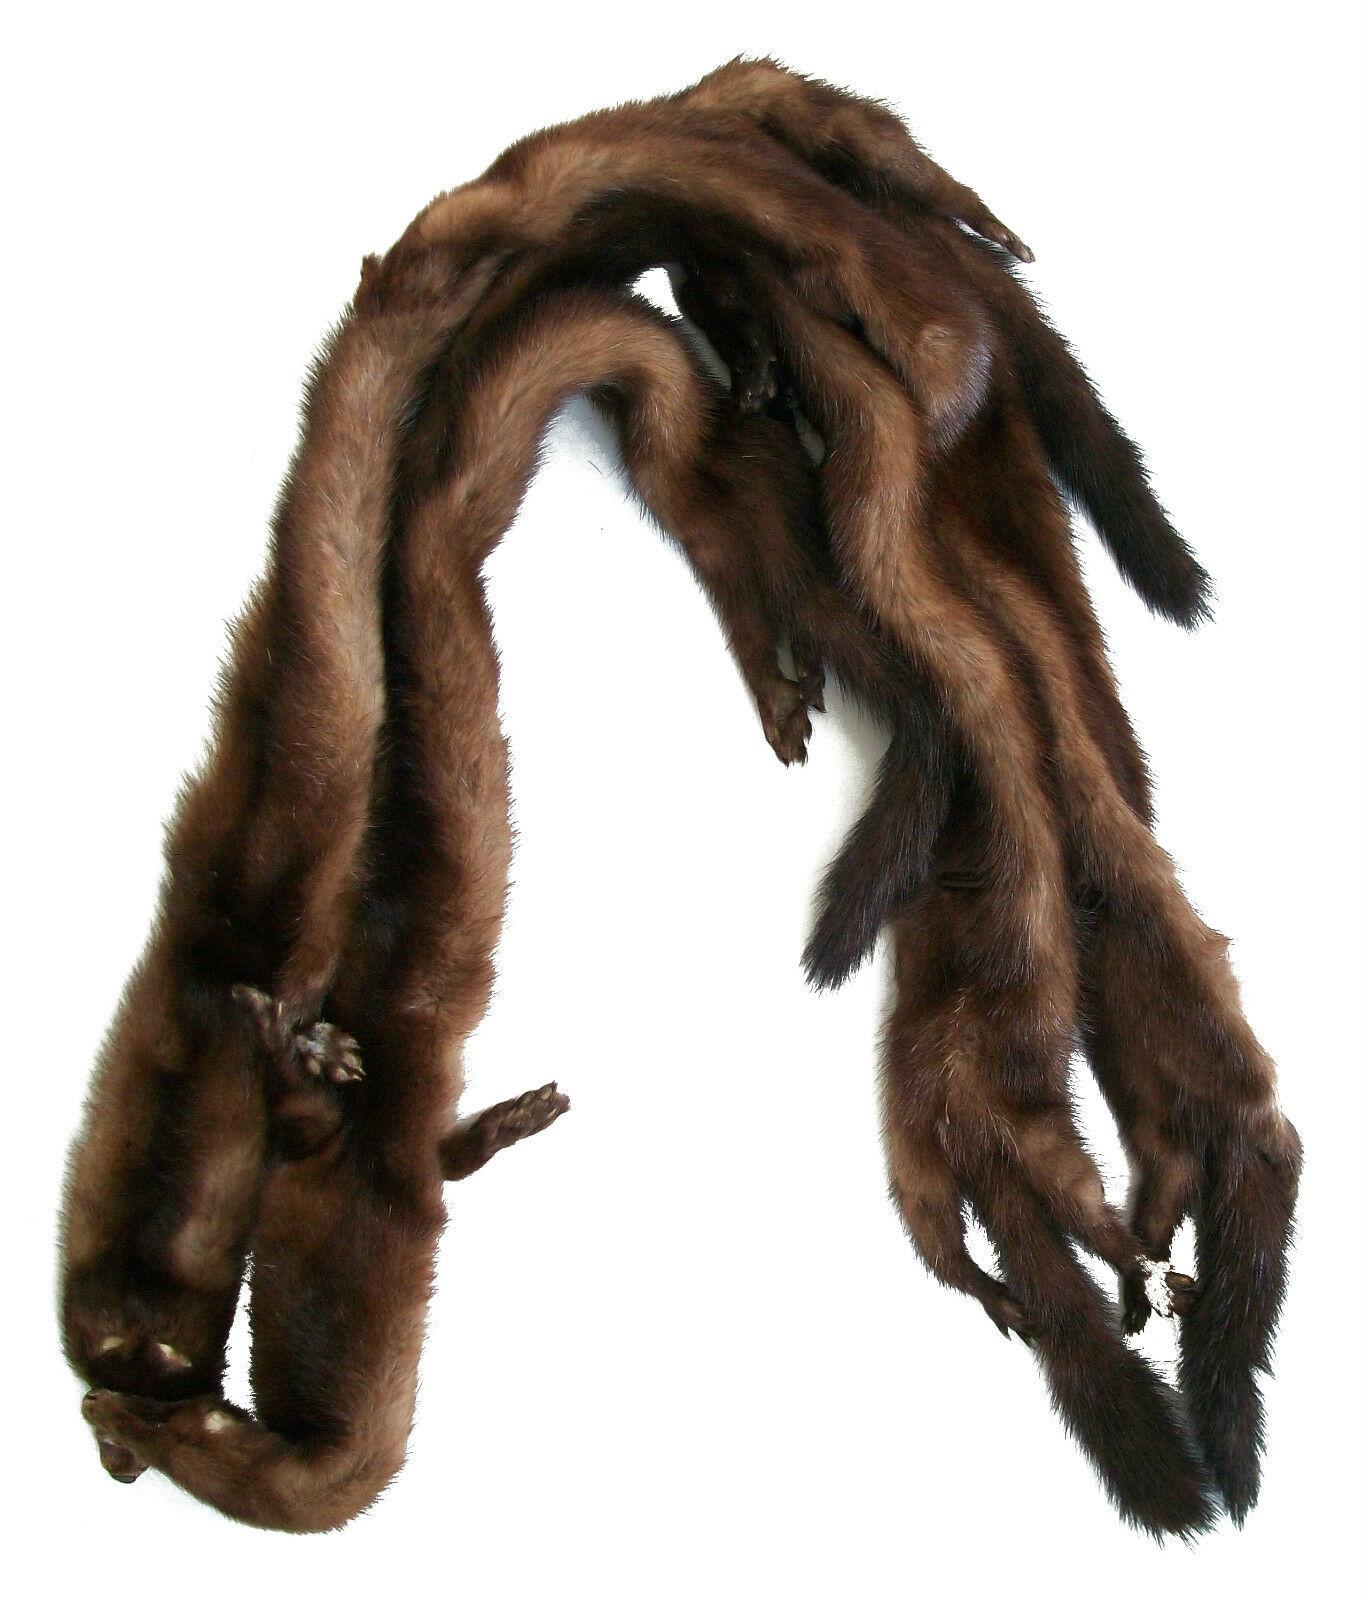 Canadian Vintage Mahogany Mink Scarf - Full Body Pelts - Clips & Buttons - Circa 1940's For Sale